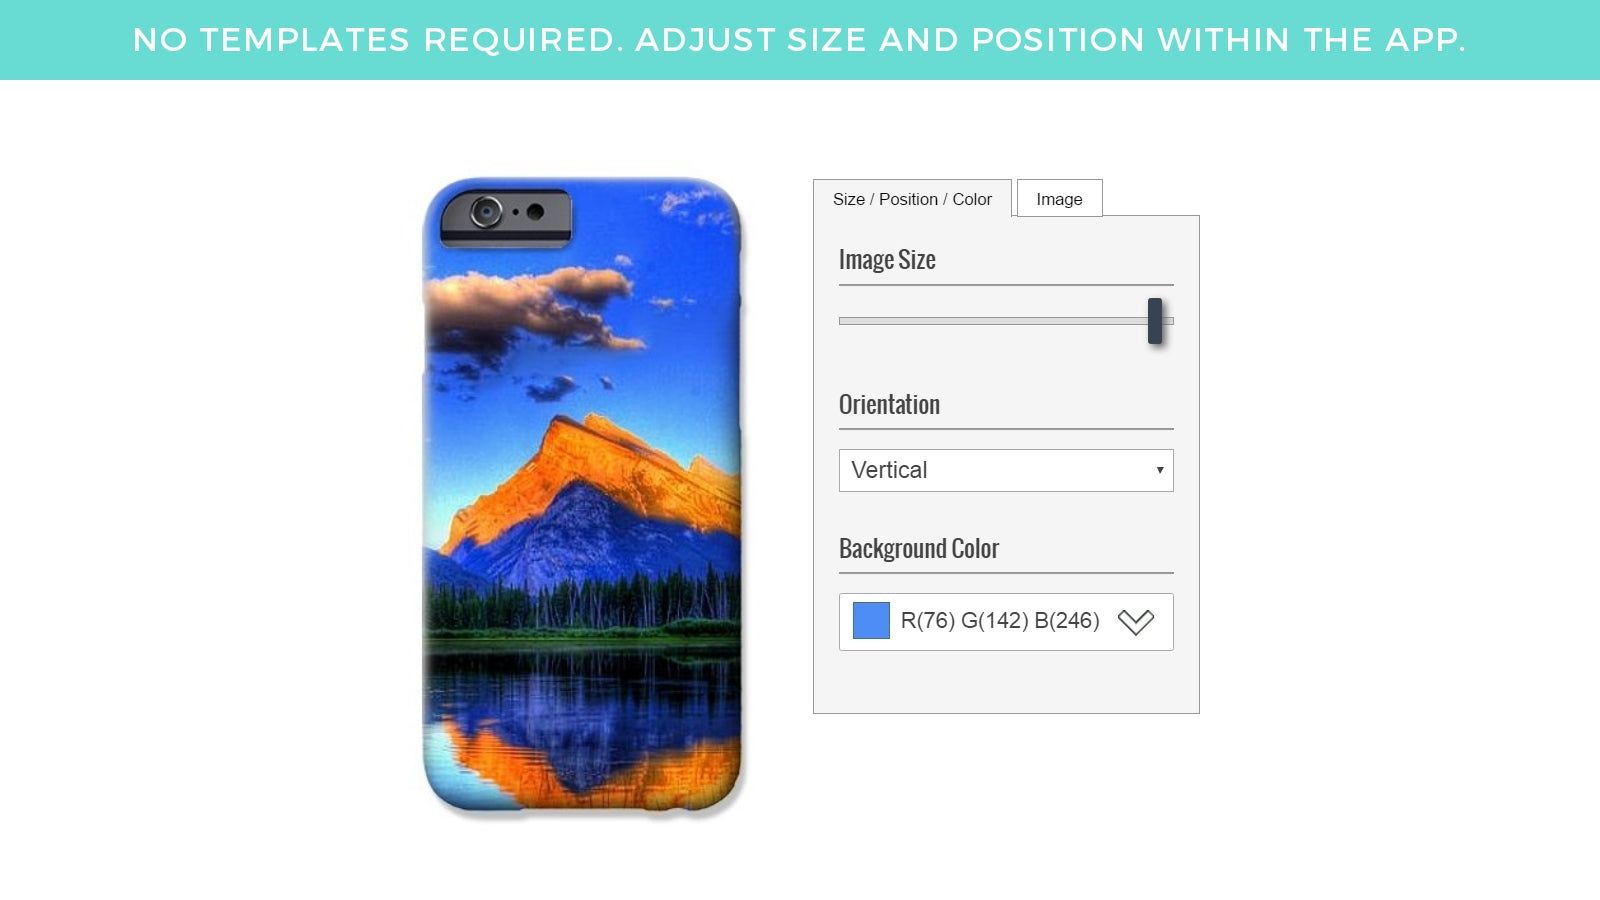 No Templates Required - Adjust Size & Position Within the App